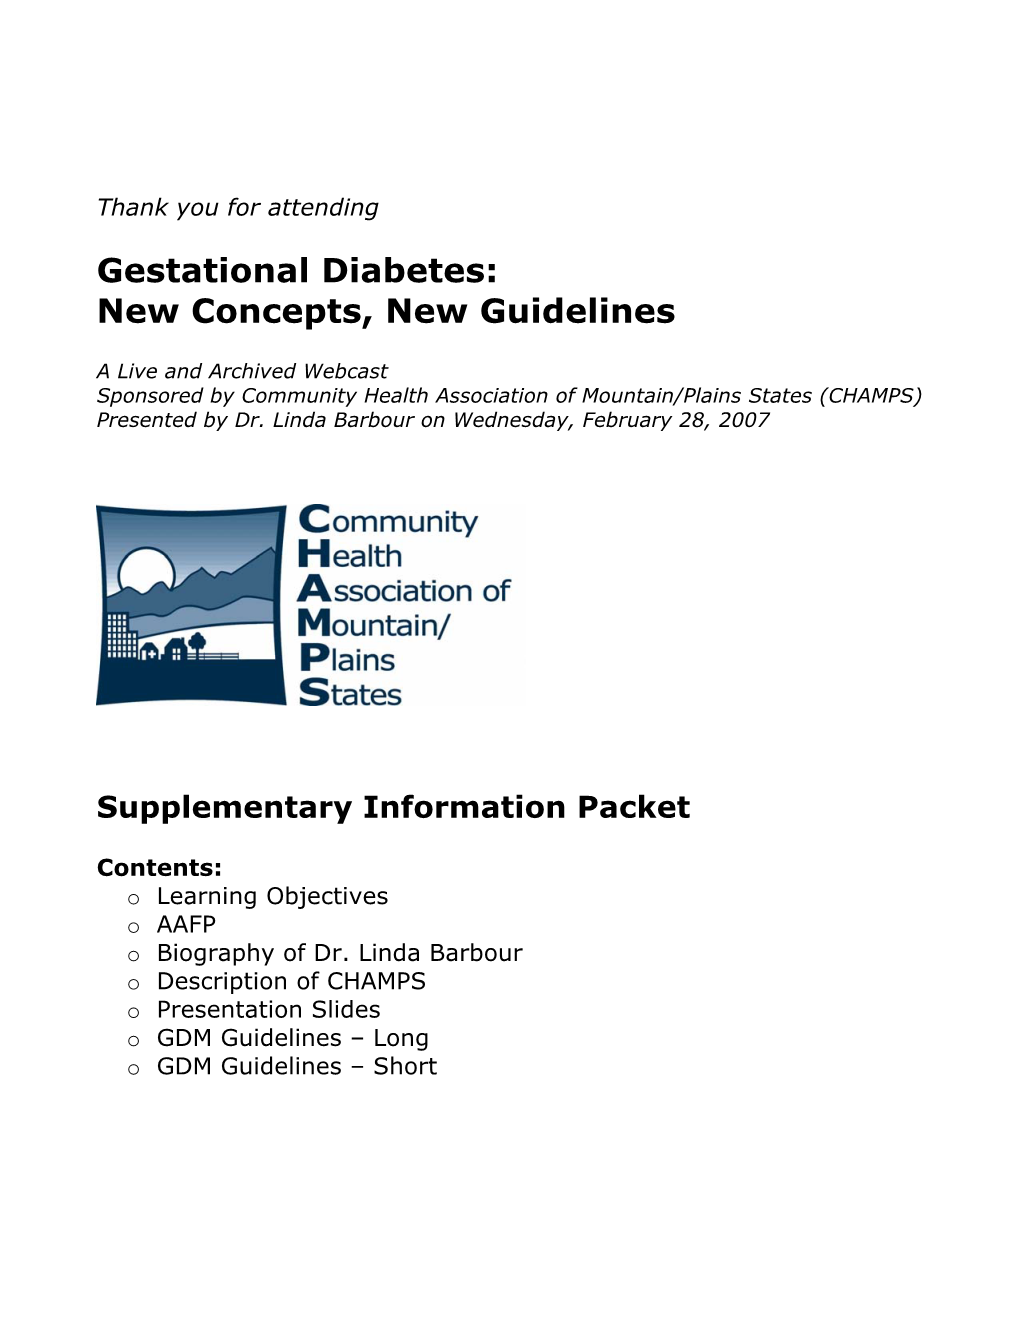 Gestational Diabetes: New Concepts, New Guidelines